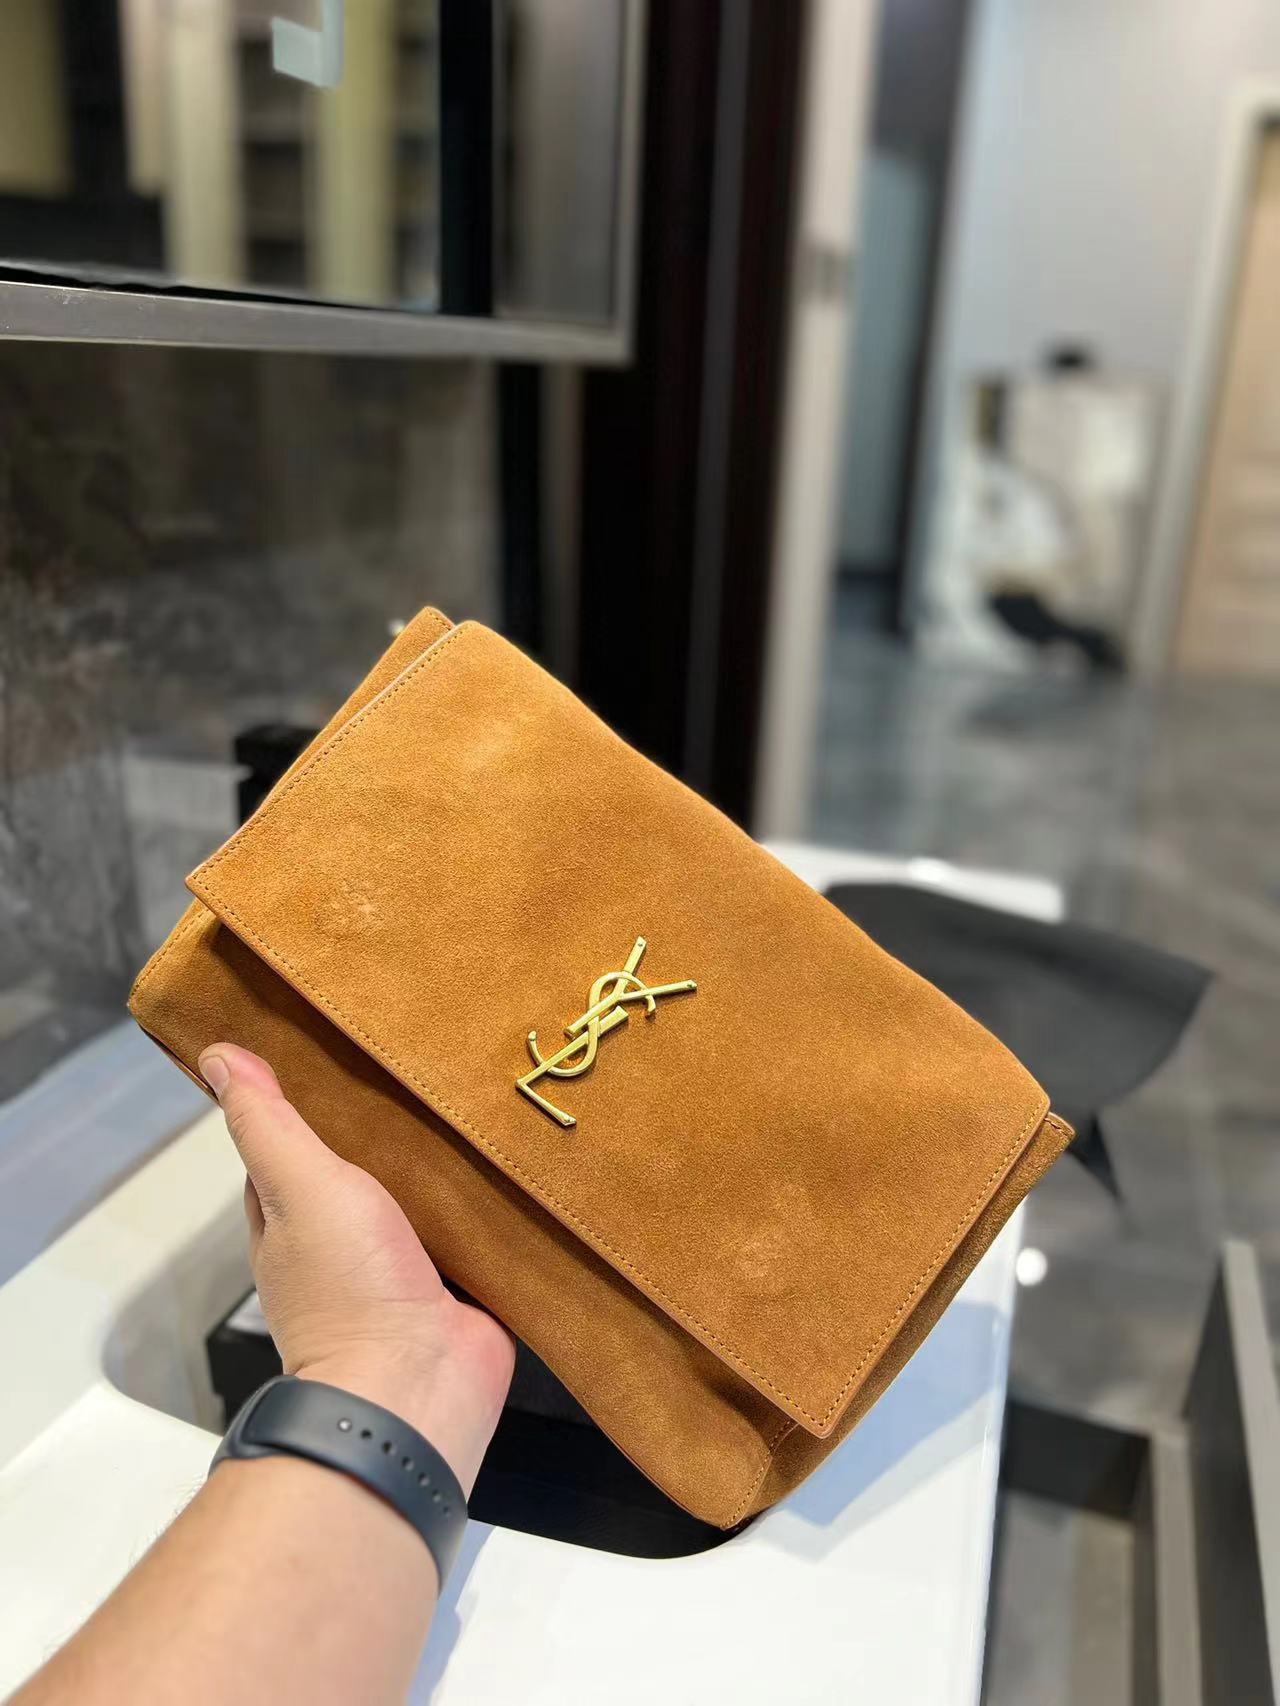 Best Replicas Bags - YSL KATE REVERSE Top Quality Louis Vuitton LV Replica Bags On Sales